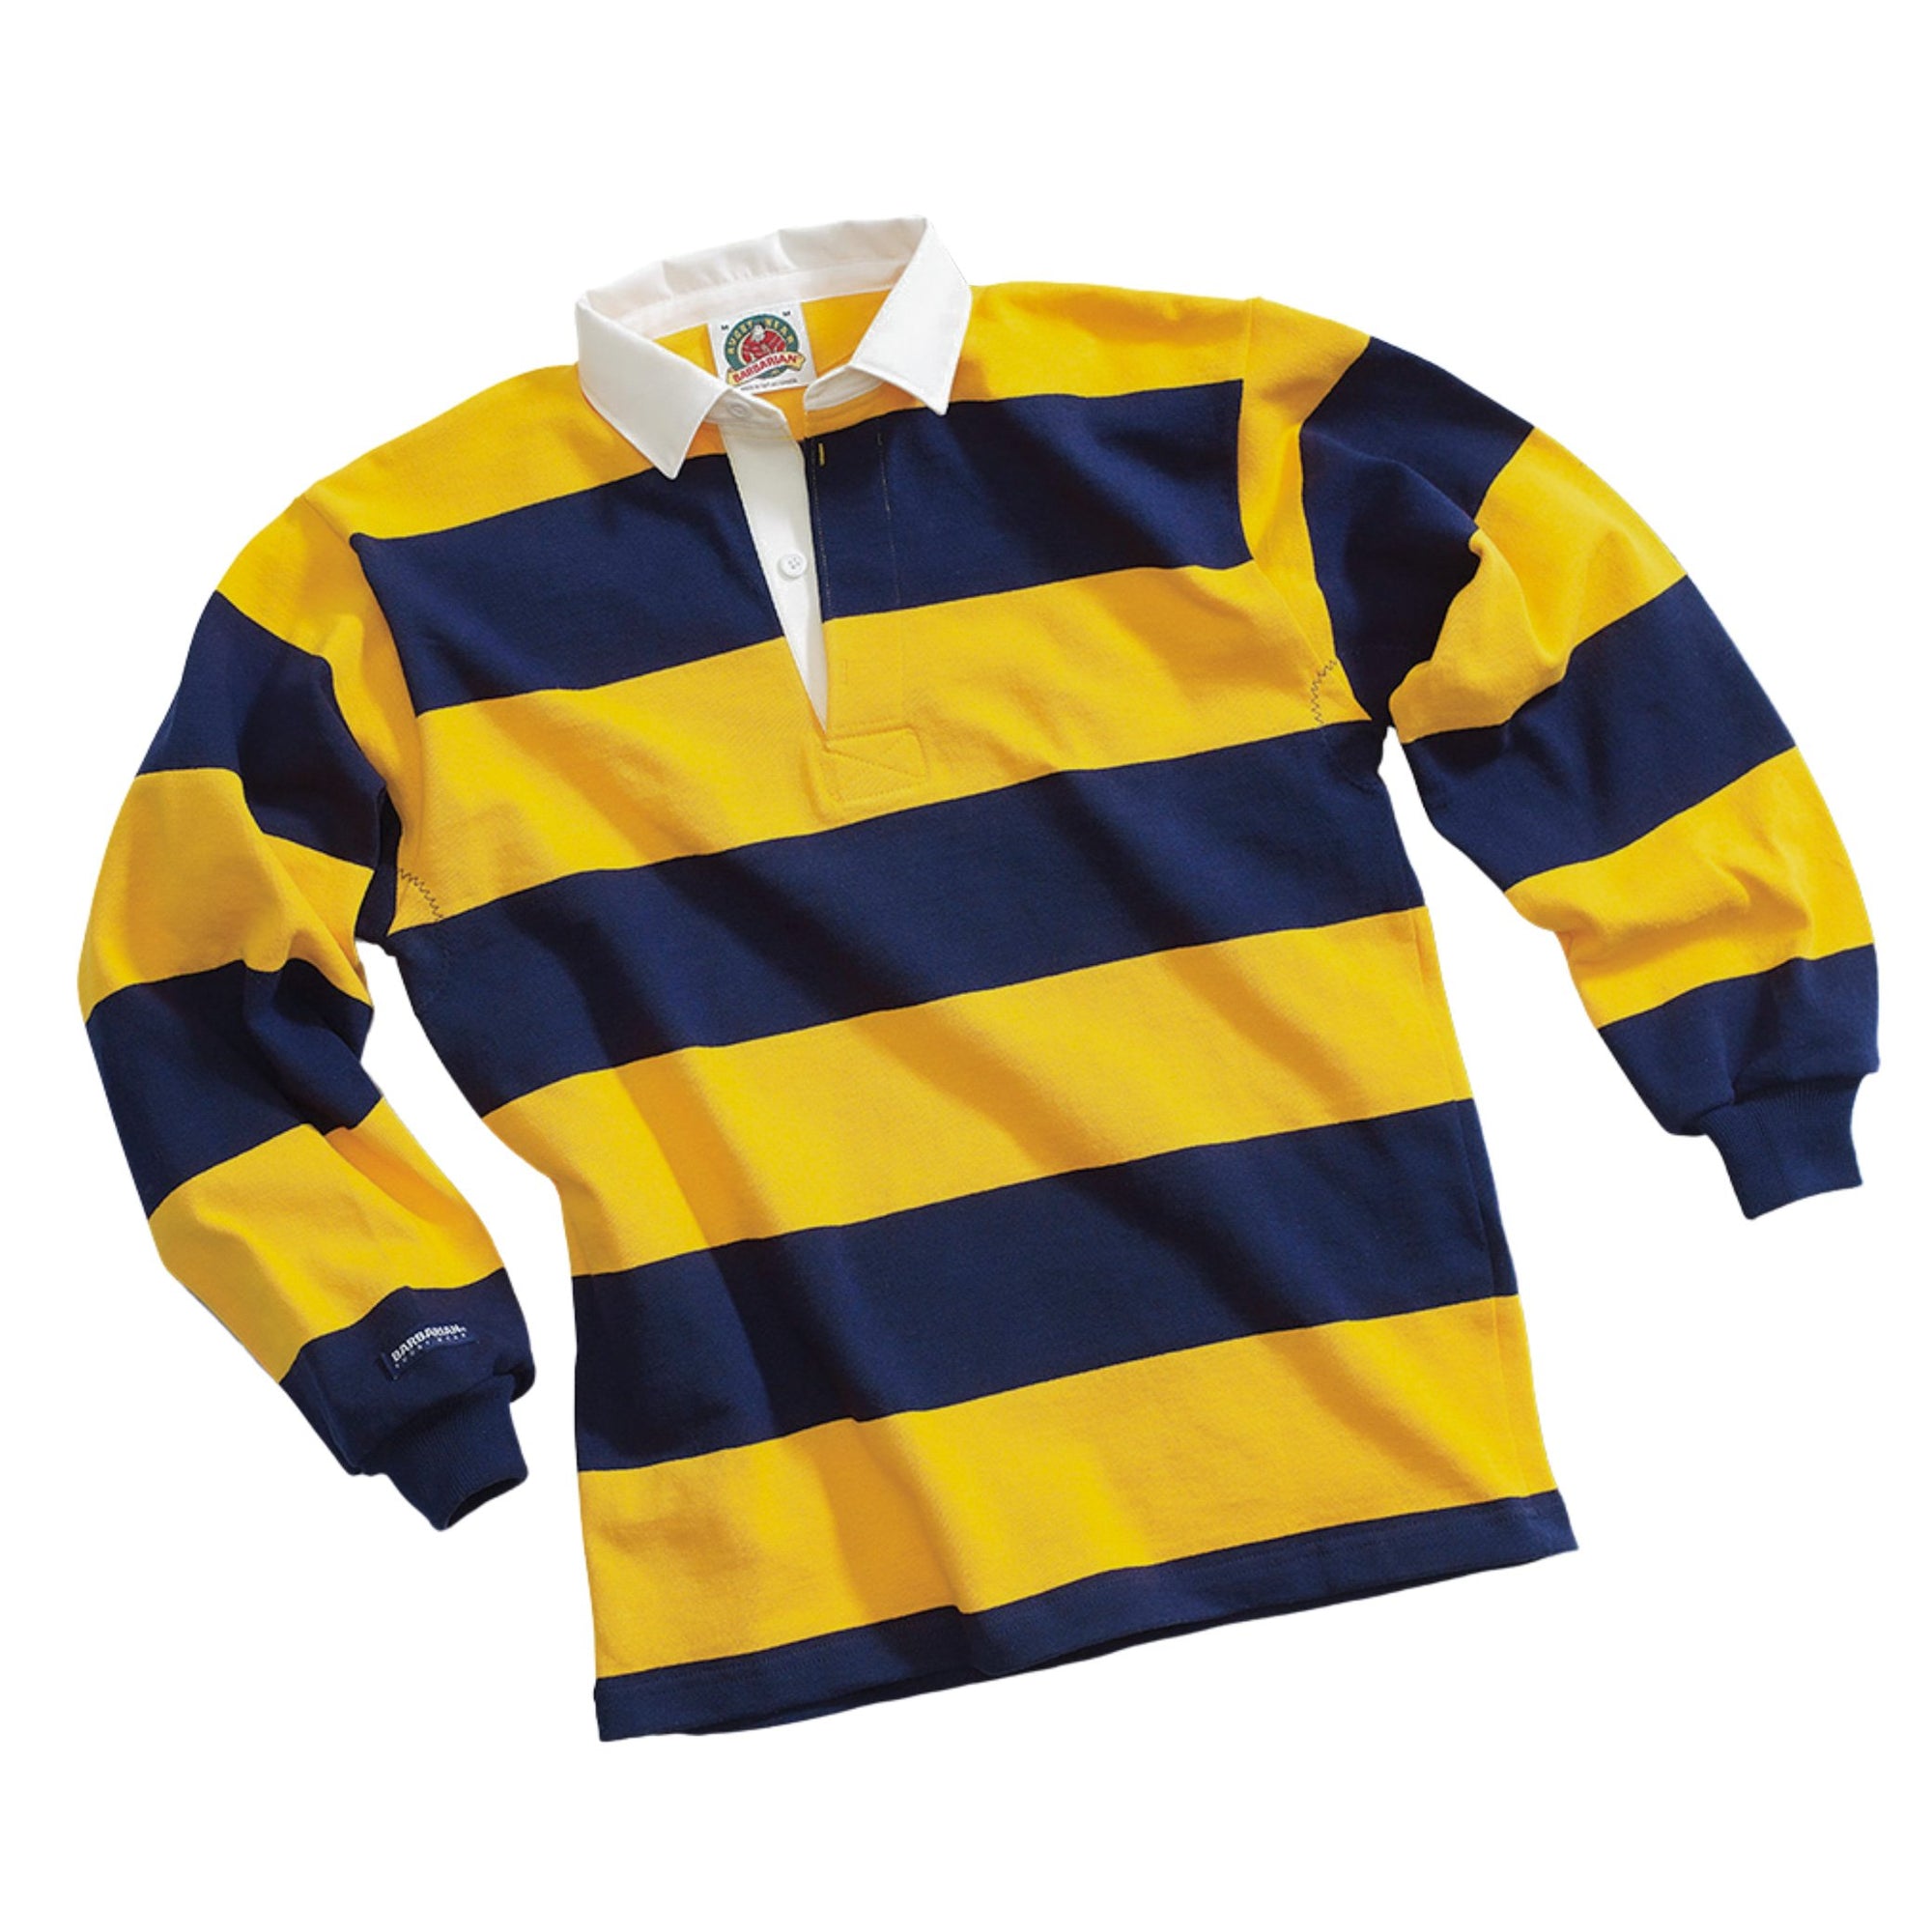 Rugby League Shirts & Jerseys - Rugby Shirts & Jerseys - Rugby